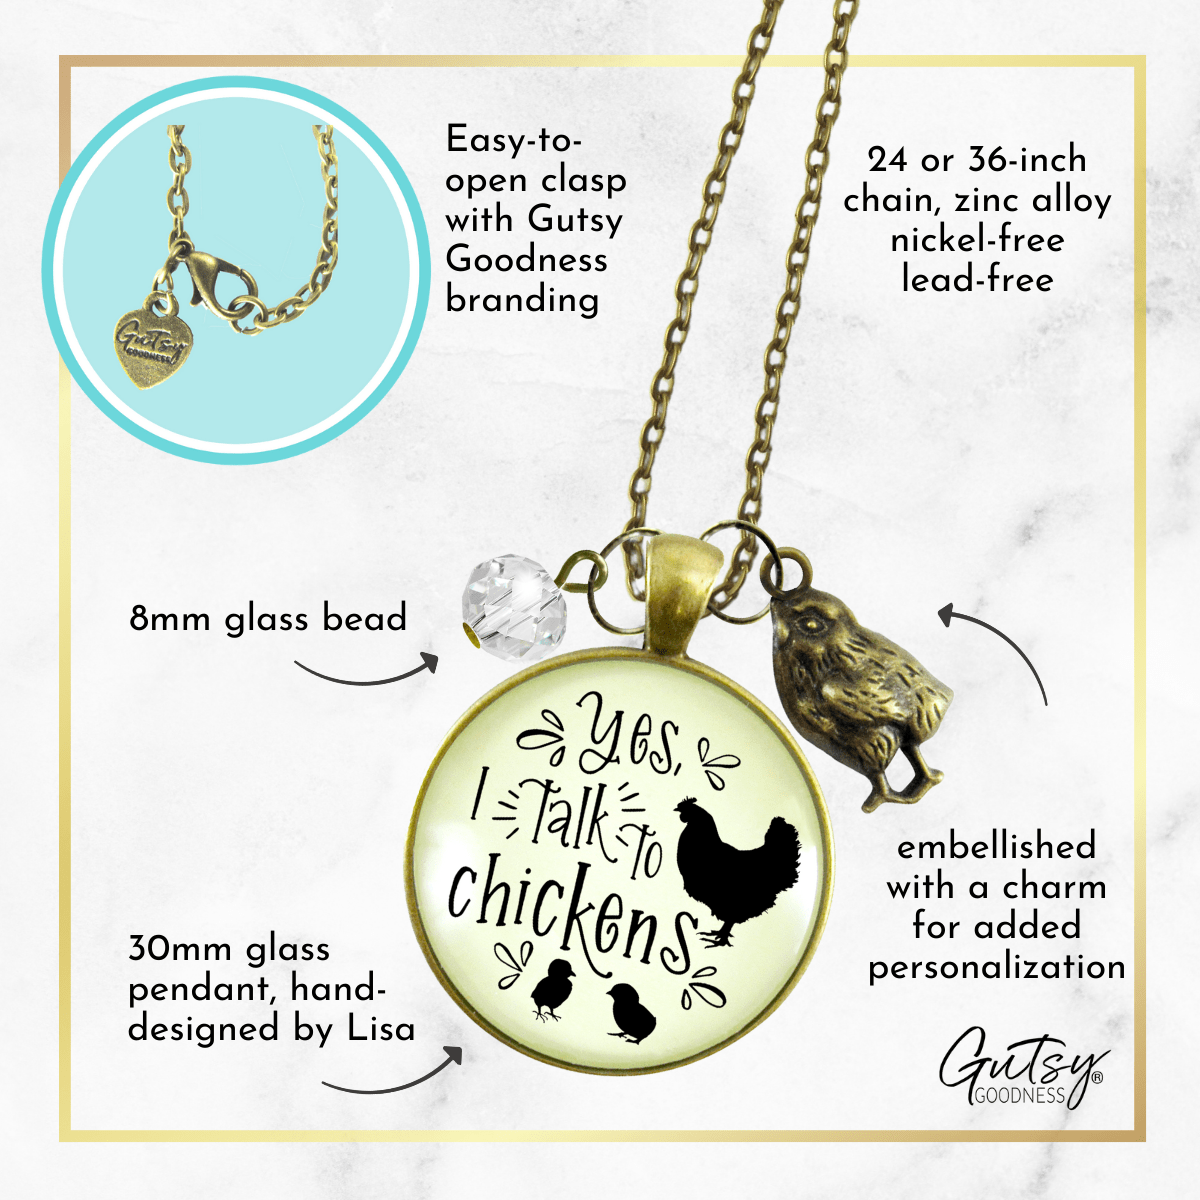 Gutsy Goodness Chicken Mom Necklace Yes I Talk To Chickens Novelty Gift Farm Life Inspired - Gutsy Goodness;Chicken Mom Necklace Yes I Talk To Chickens Novelty Gift Farm Life Inspired - Gutsy Goodness Handmade Jewelry Gifts